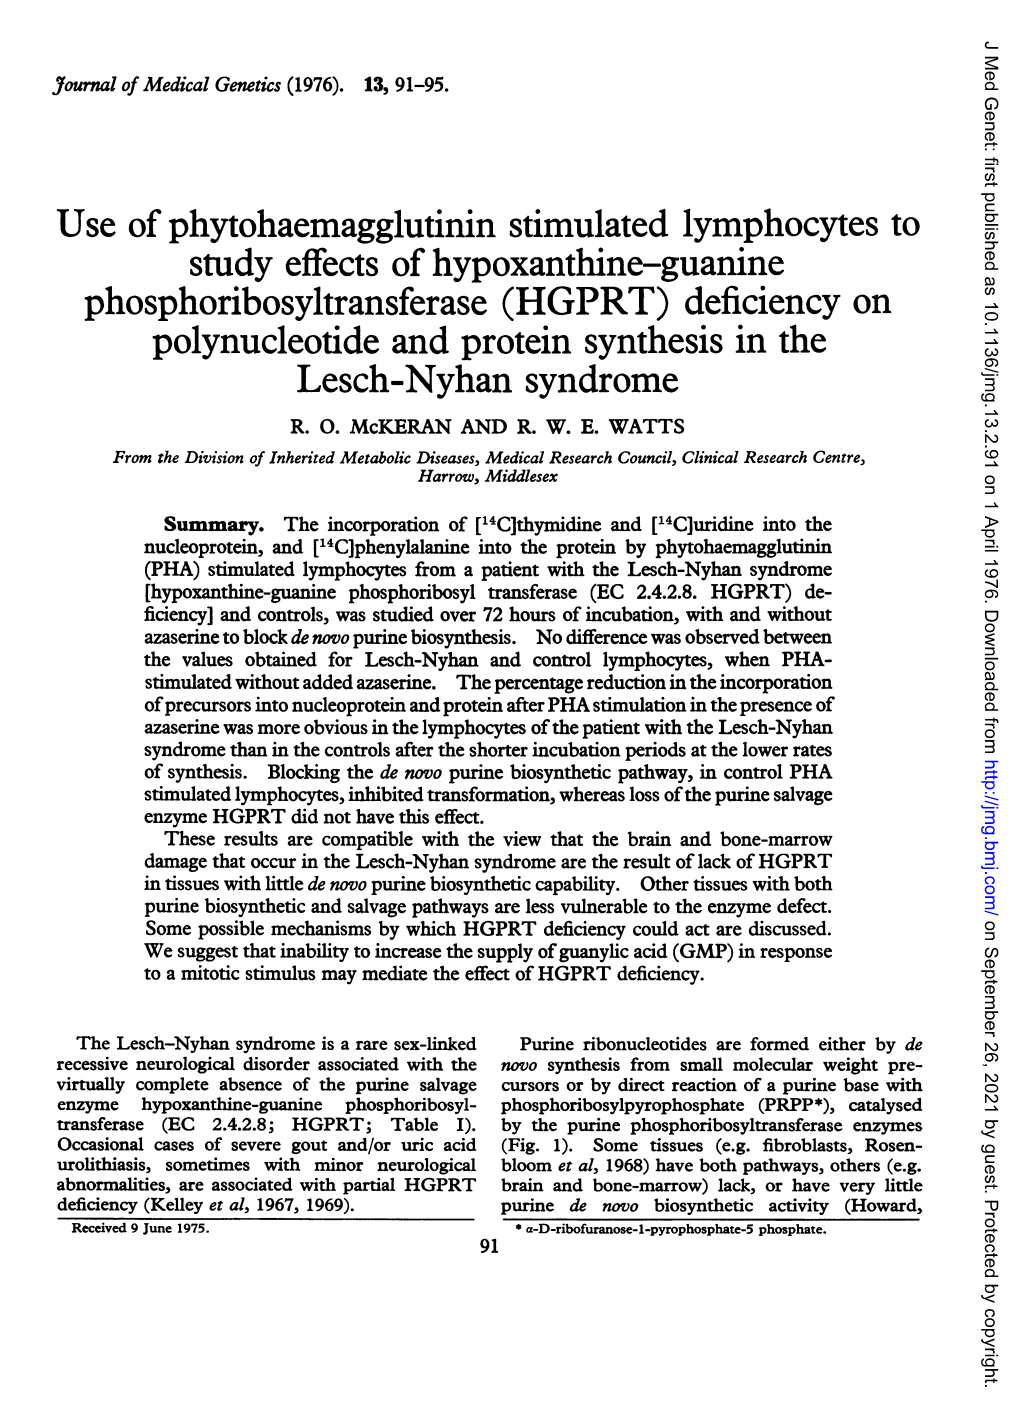 Study Effects of Hypoxanthine-Guanine Phosphoribosyltransferase (HGPRT) Deficiency on Polynucleotide and Protein Synthesis in the Lesch-Nyhan Syndrome R